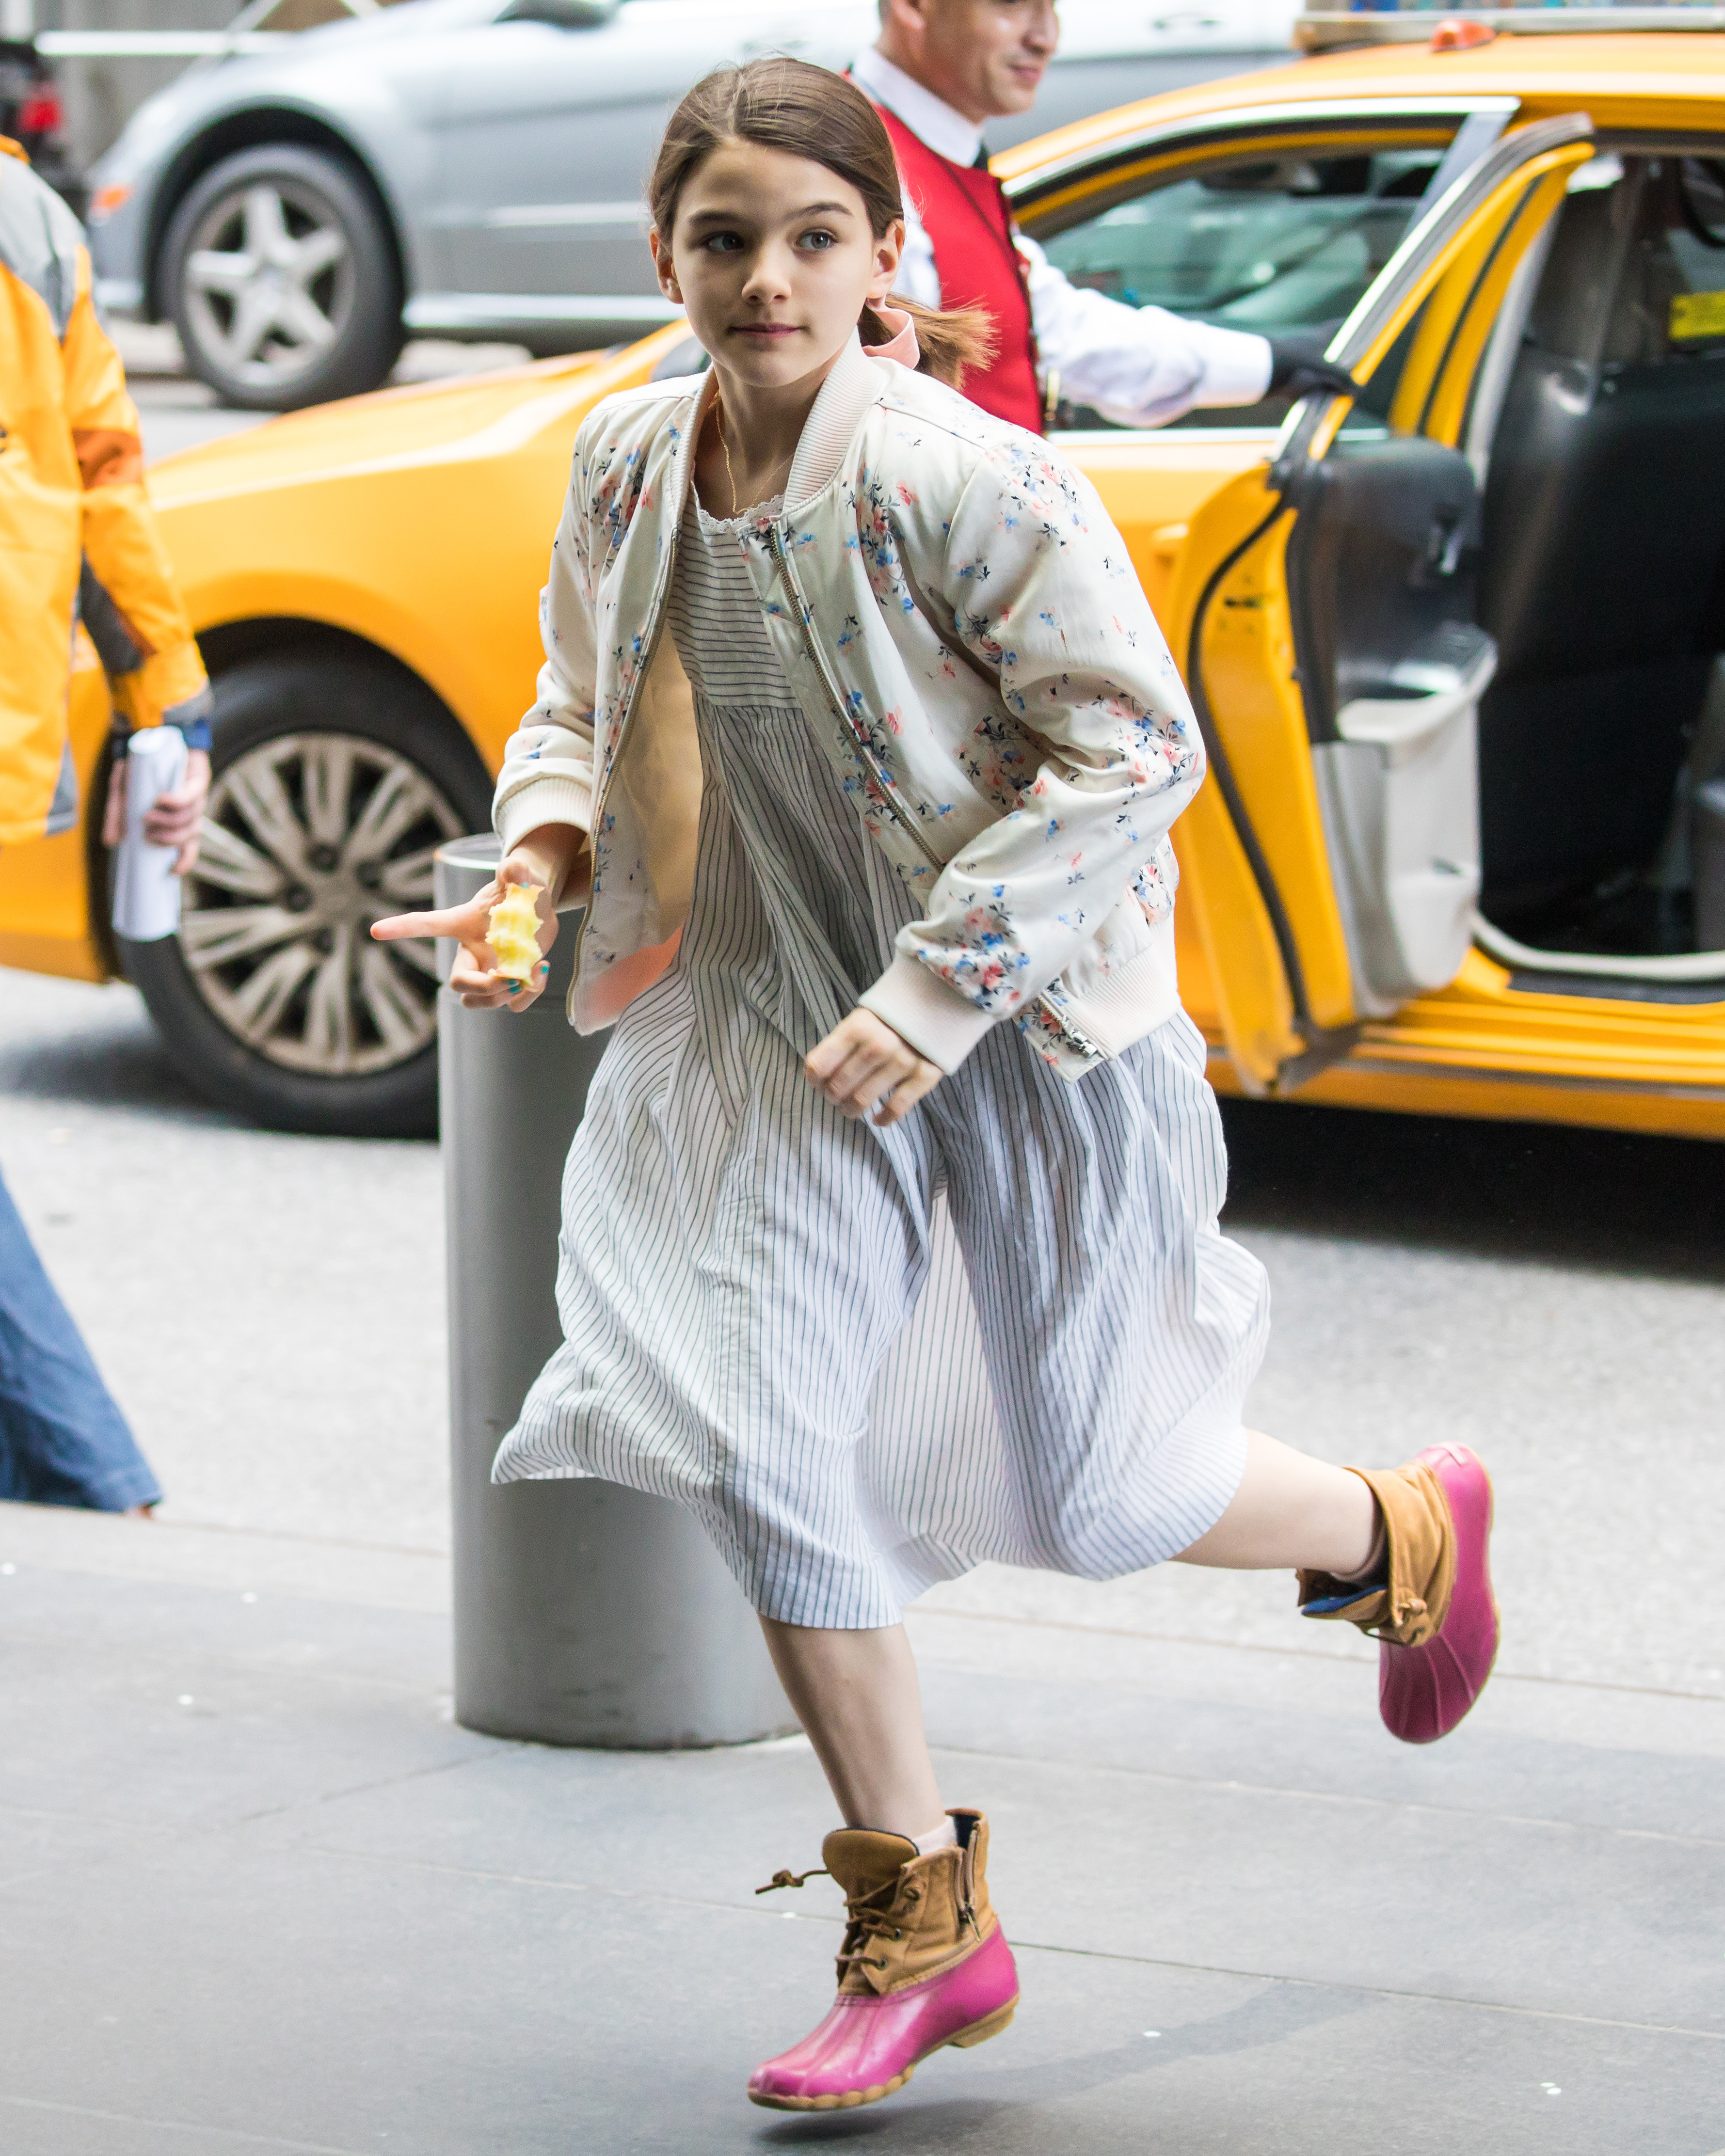 Suri Cruise is seen arriving at her hotel in New York, on April 28, 2018. | Source: Getty Images